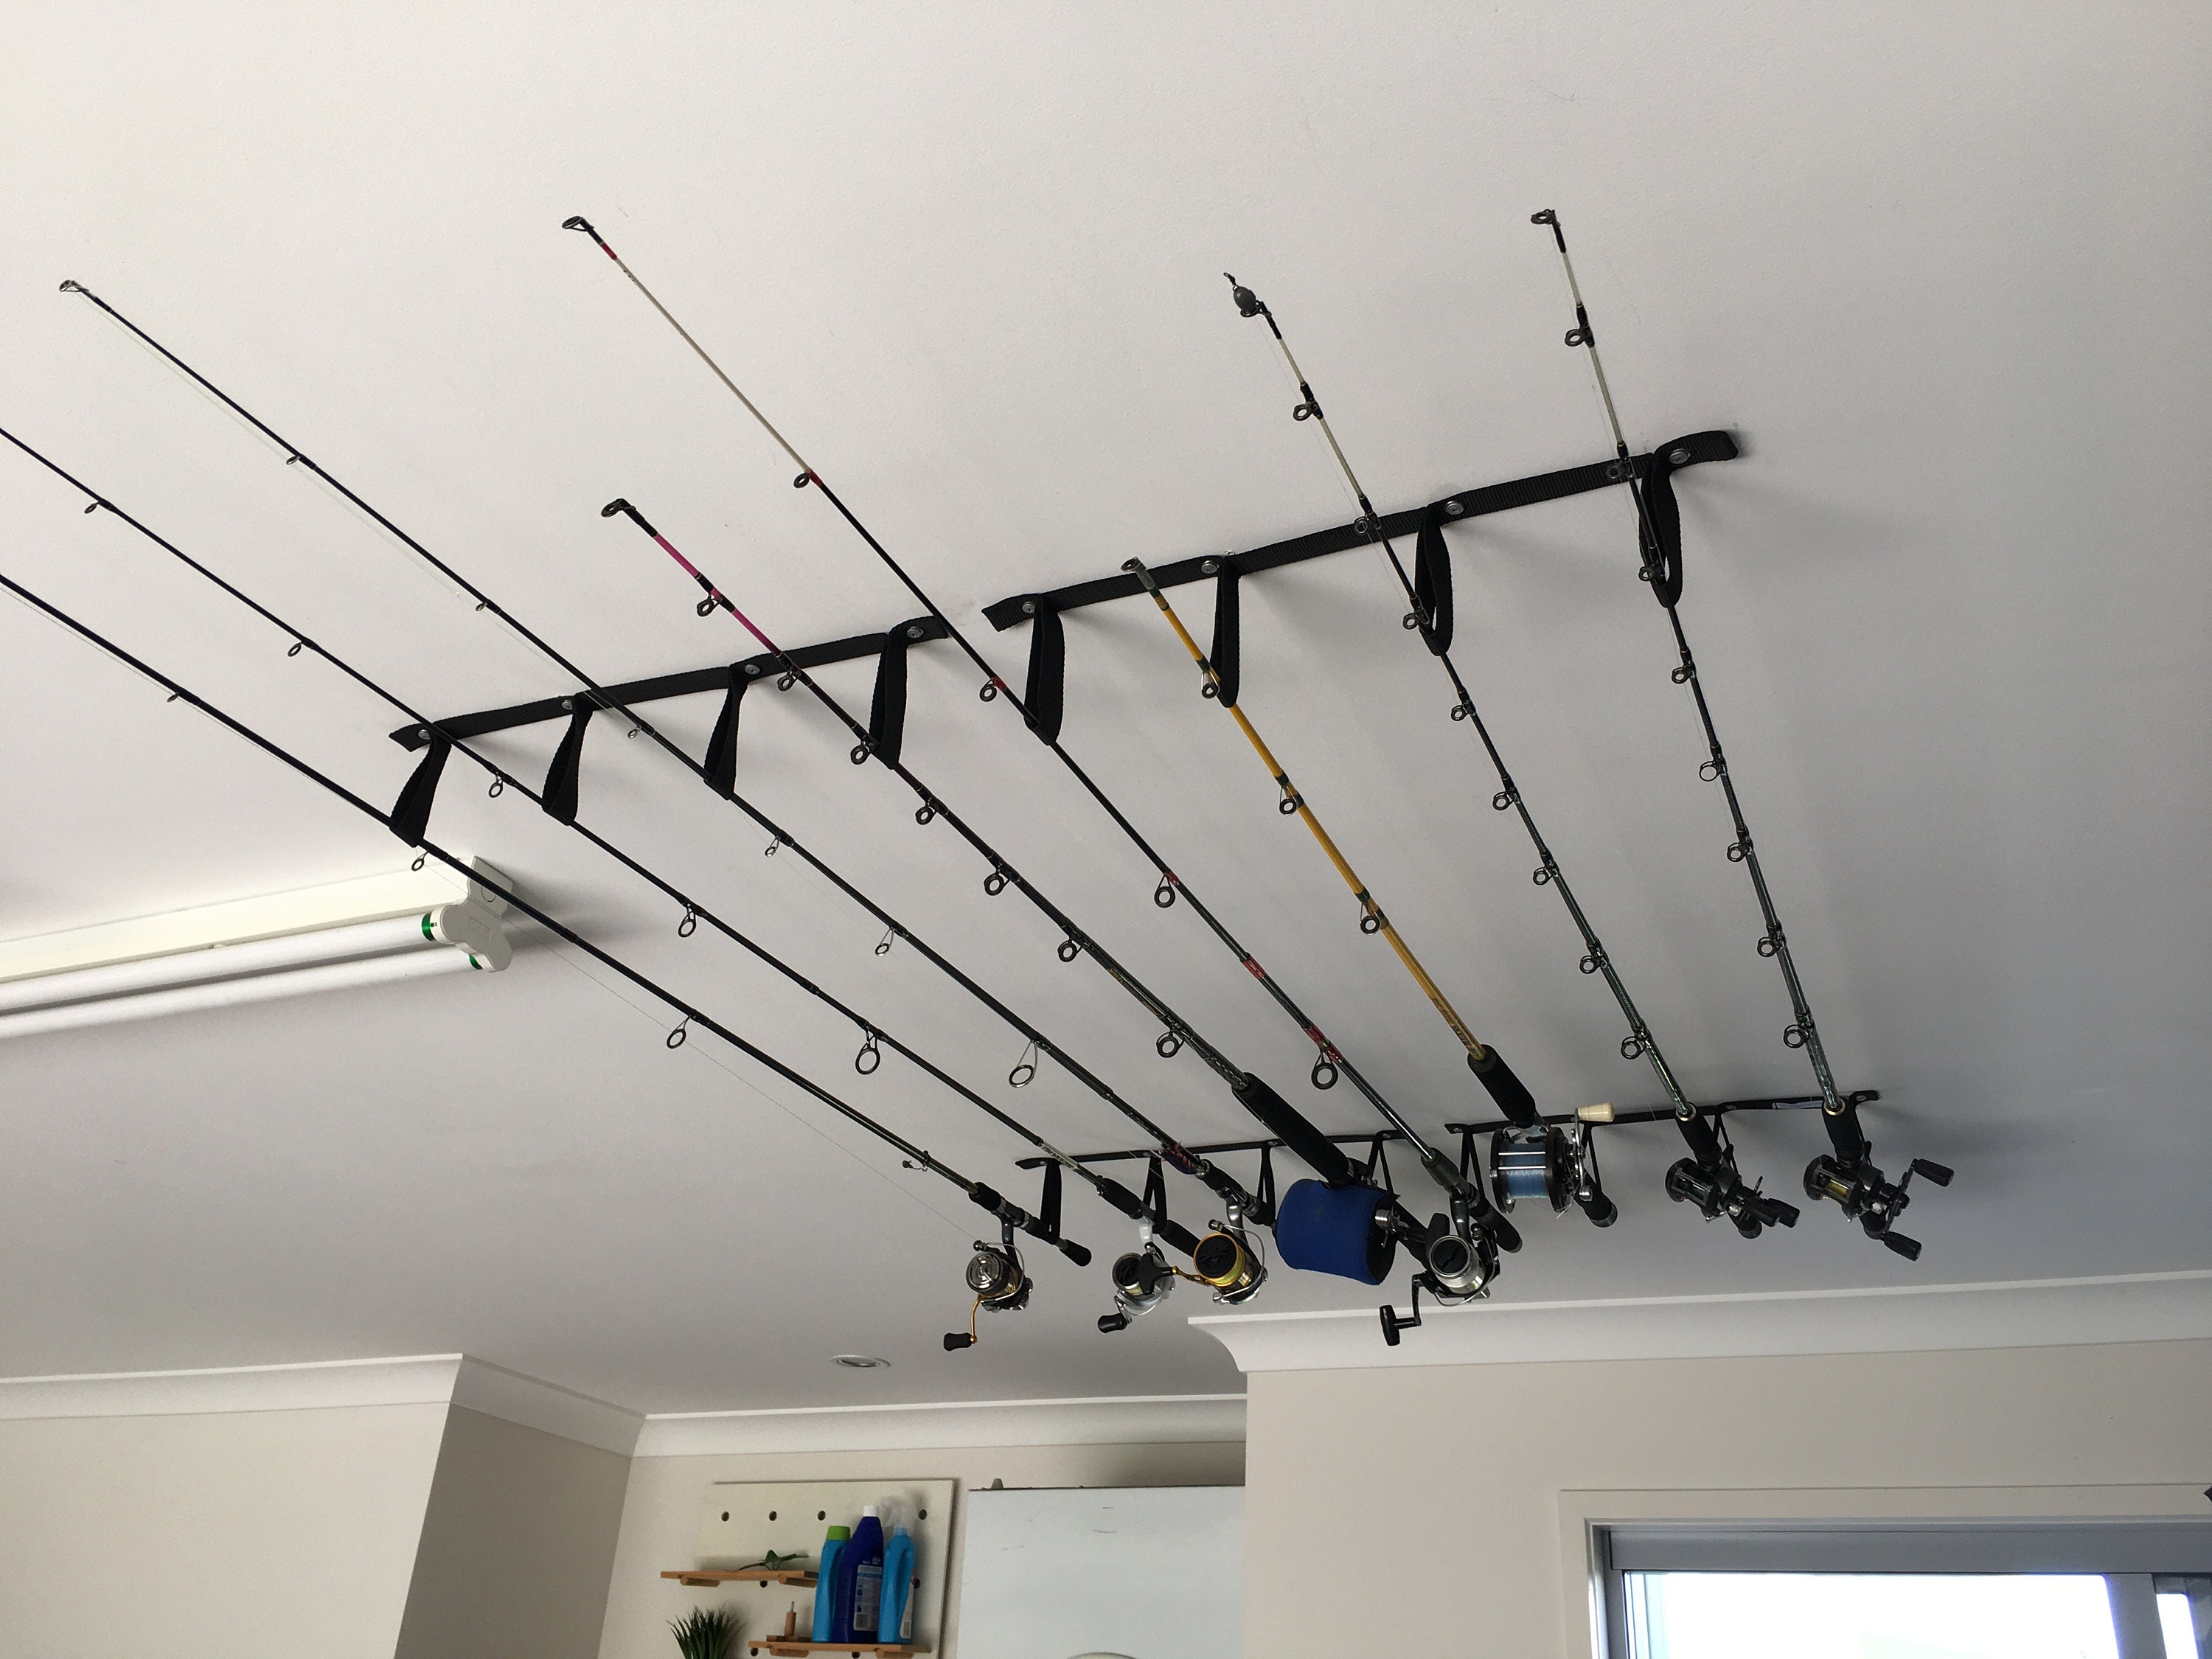 My dad made these ceiling mount fishing rod racks for me. All